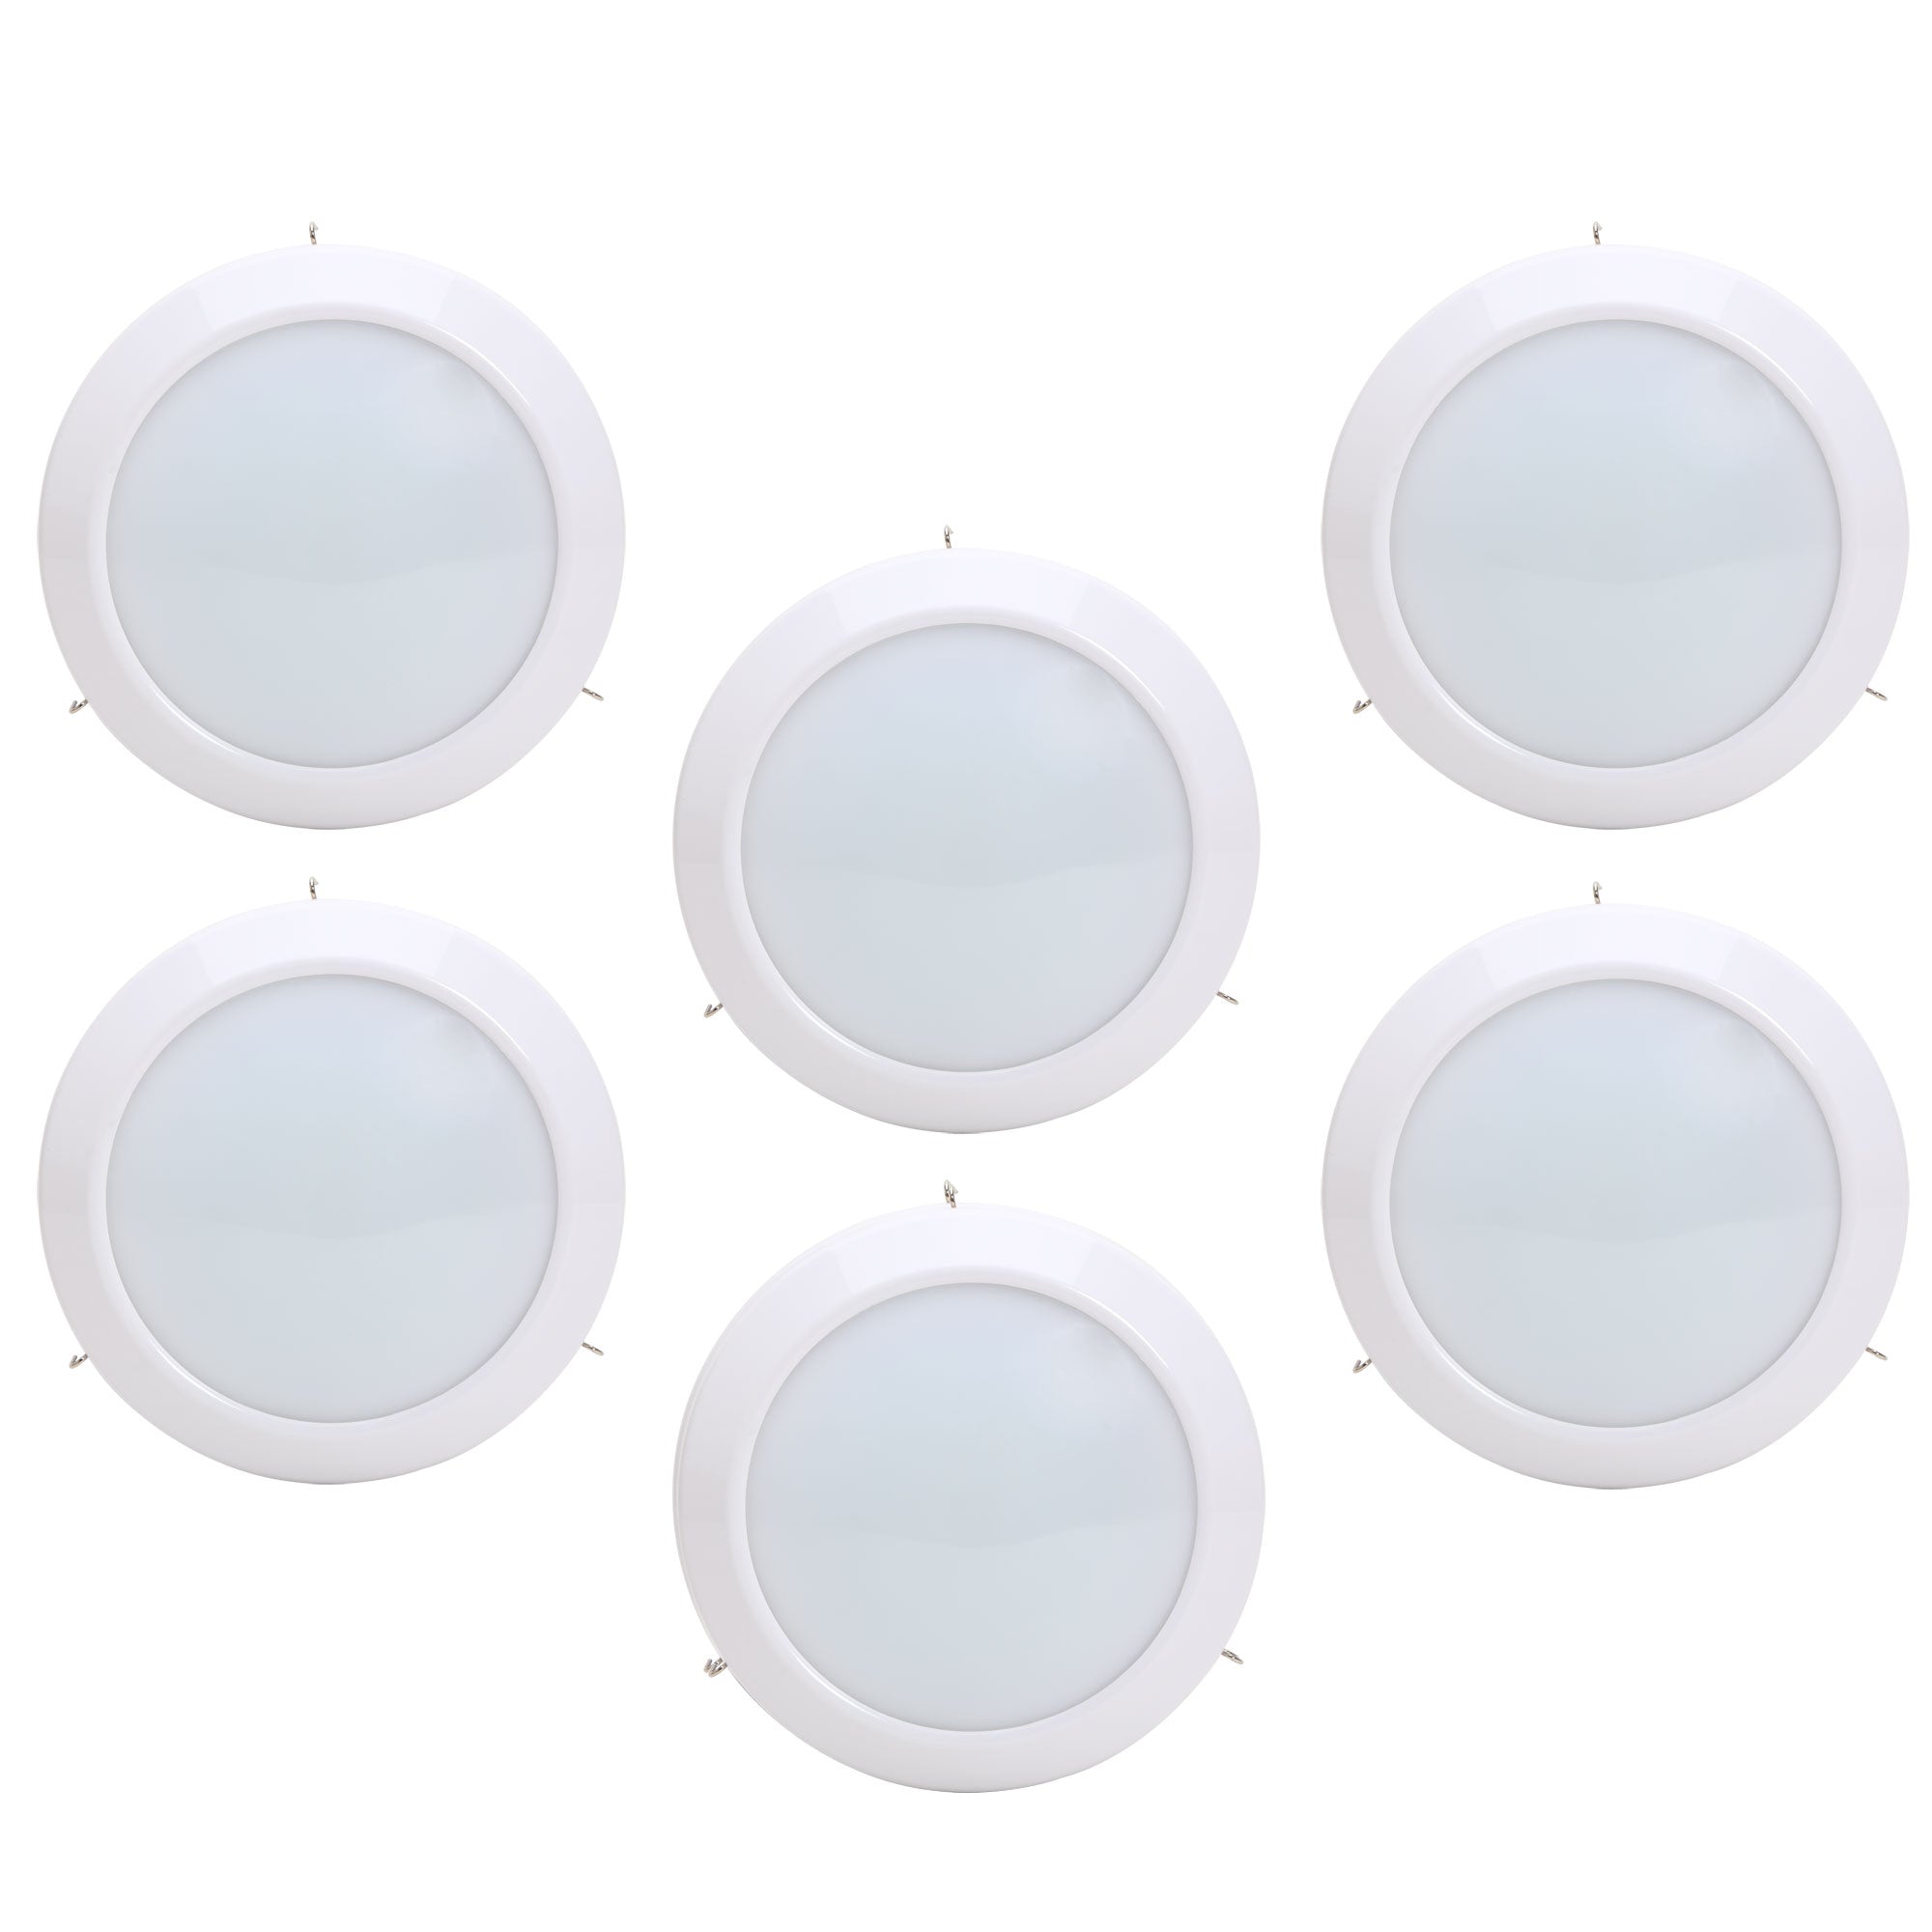 75-Watt Equivalent Universal 6in. 1000 Lumens LED Downlight Light Replacement Disc, Retrofit E26 Adapter Included